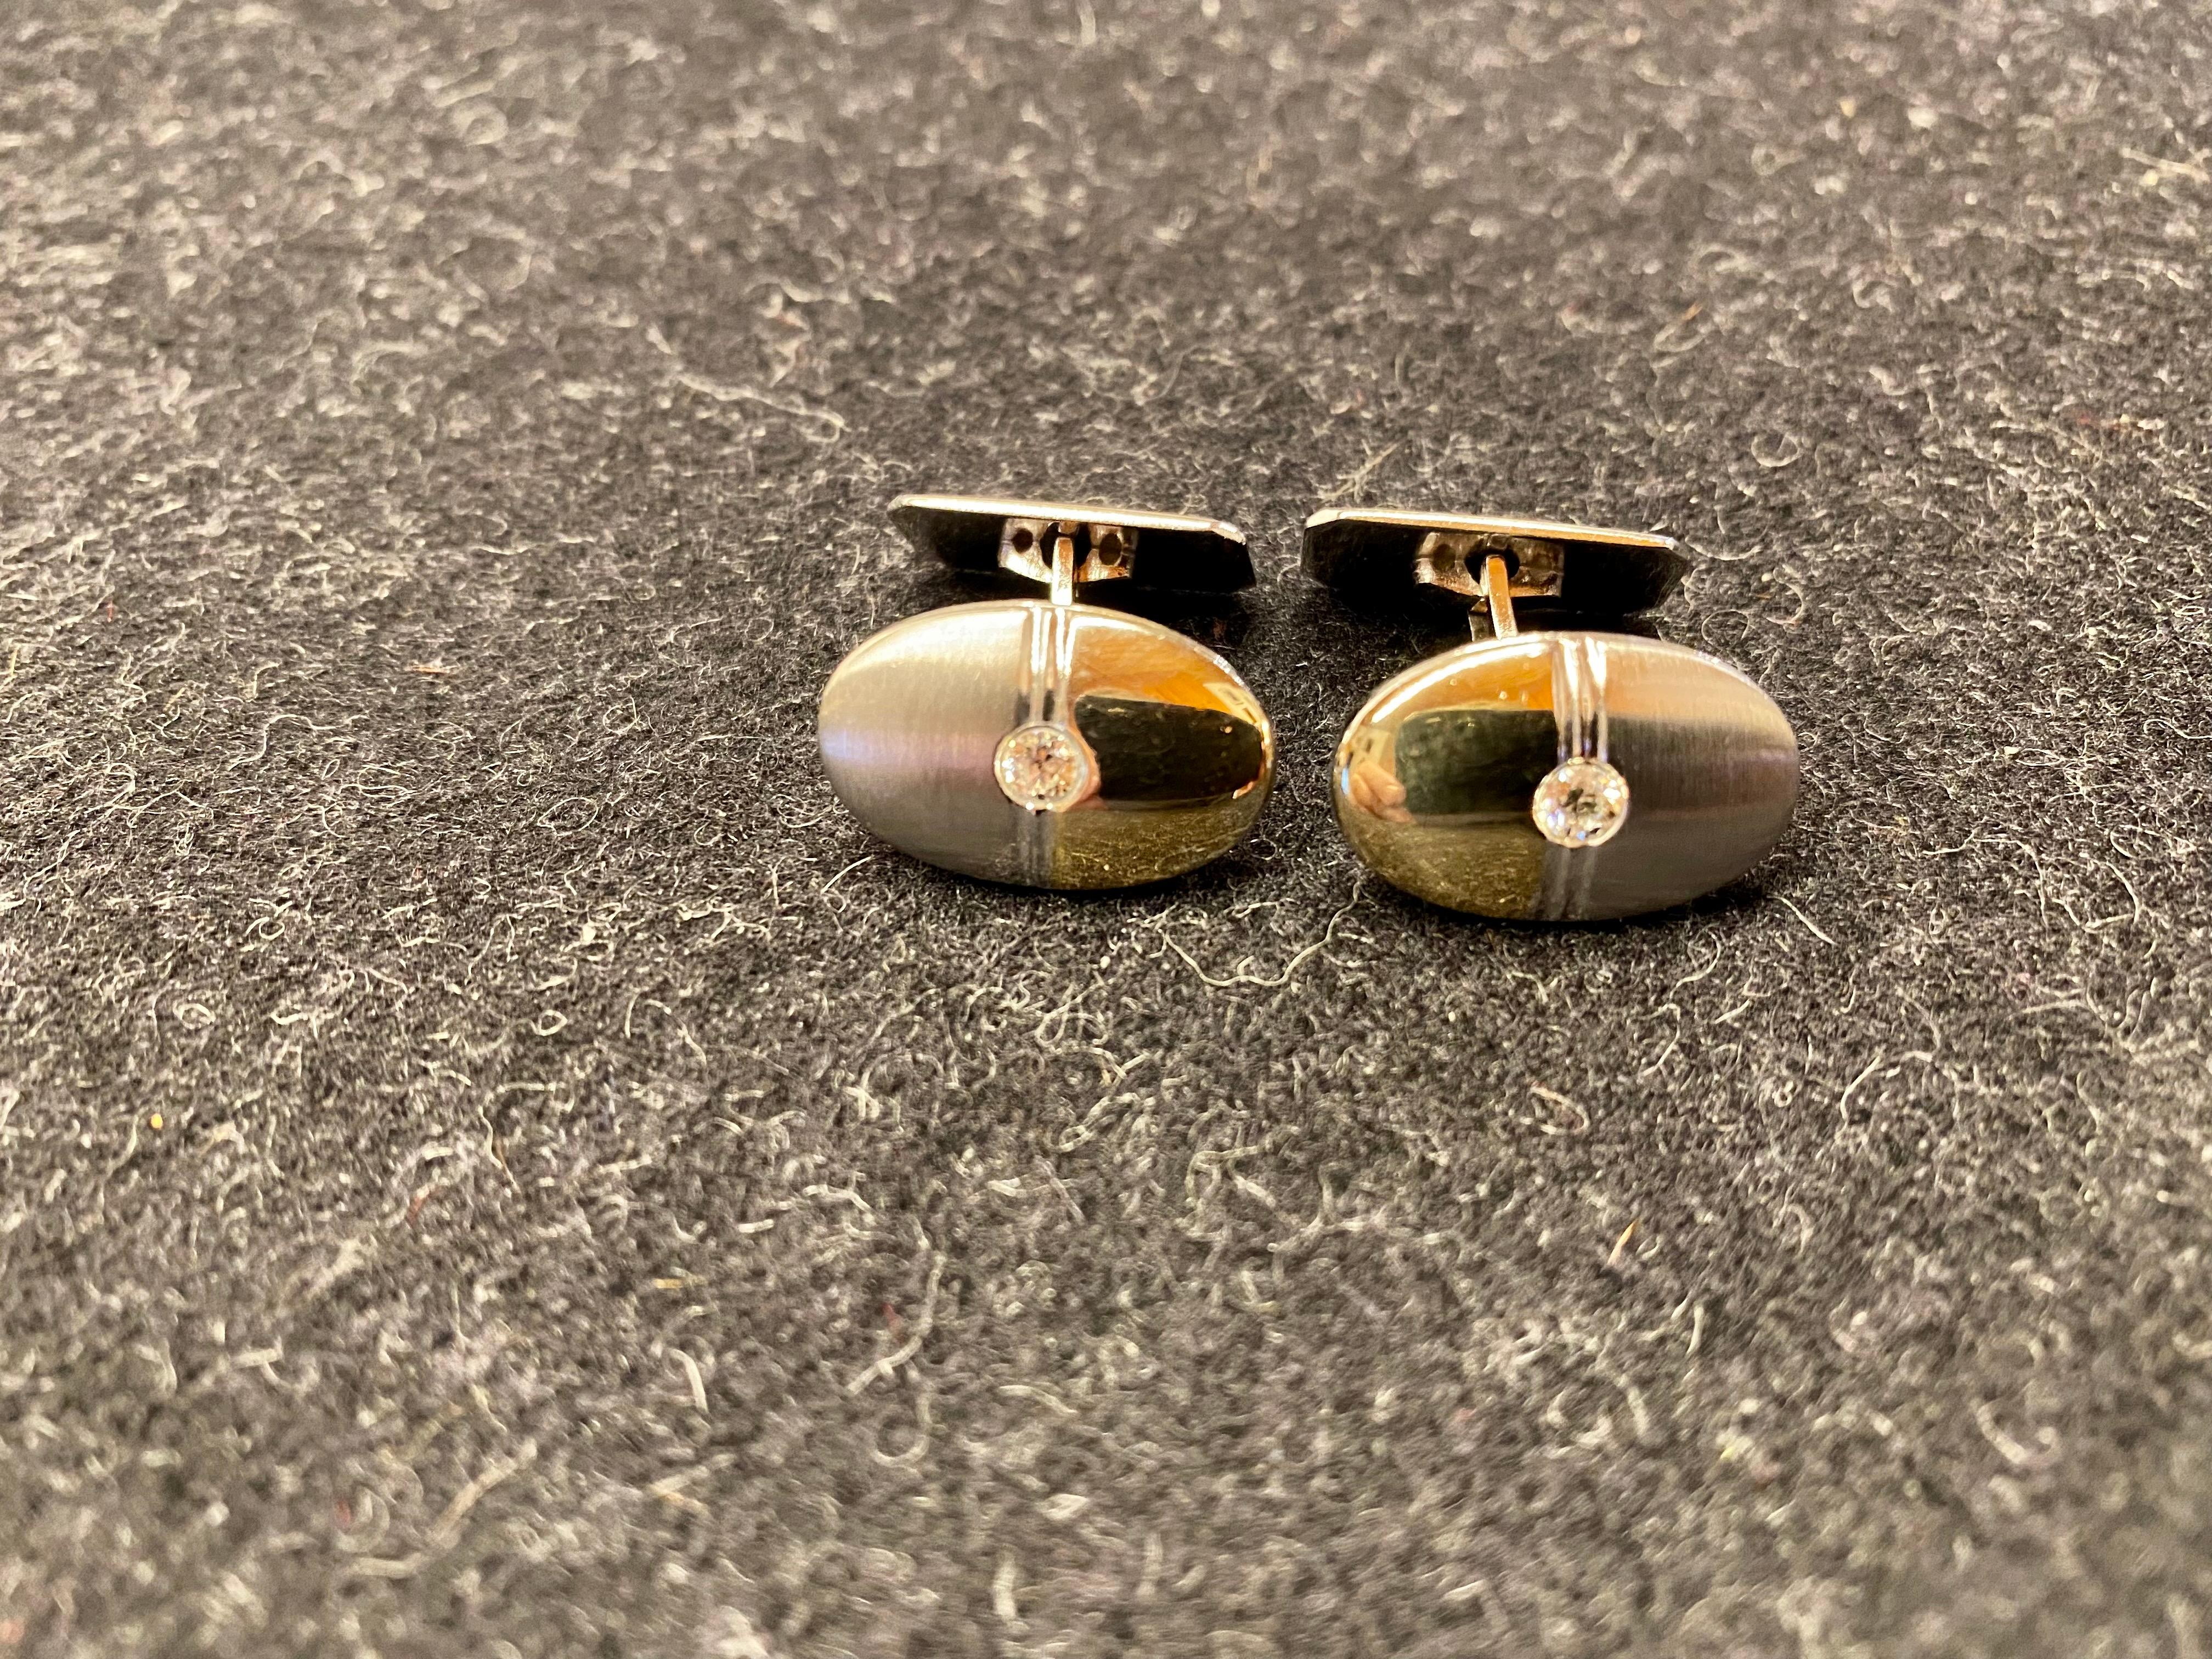 Sterling Silver 925 Cufflinks Scandinavian Modern
the other half is gilded.
Clear stone.
I think these are from Scandinavia.
Stamp 925H
Really great.
1.9cm wide